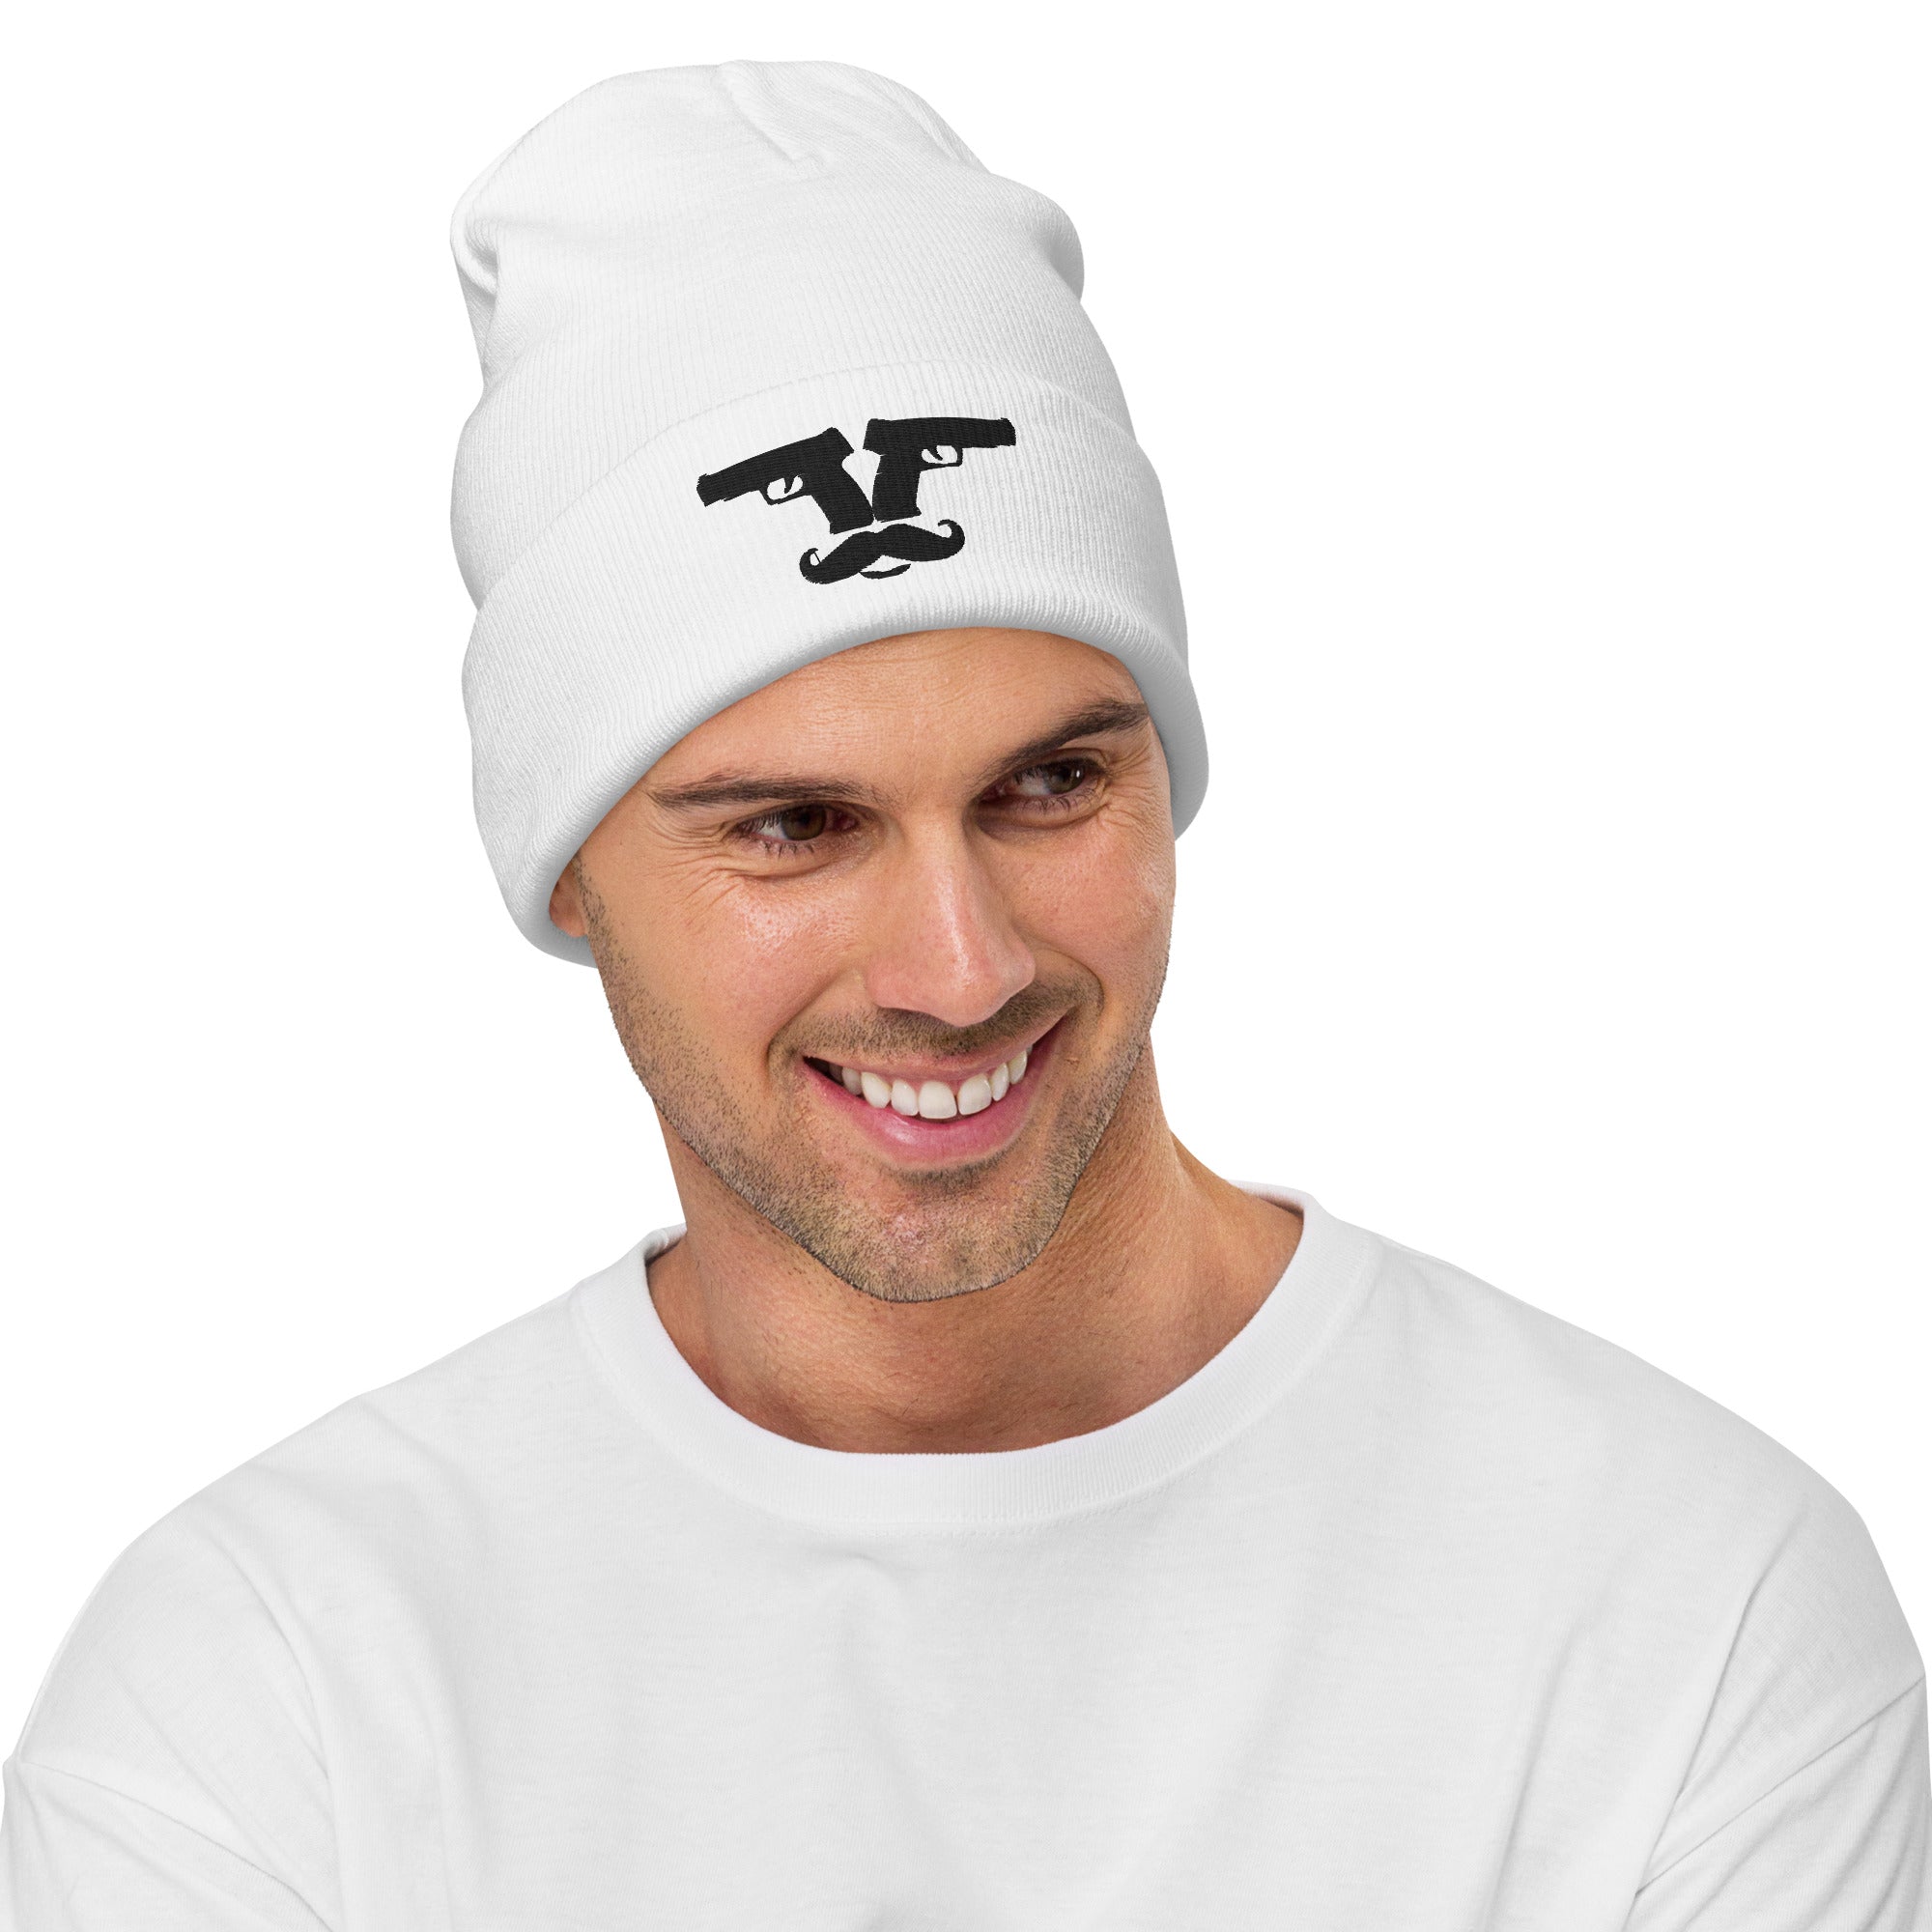 Guns Out - Embroidered Beanie (light)